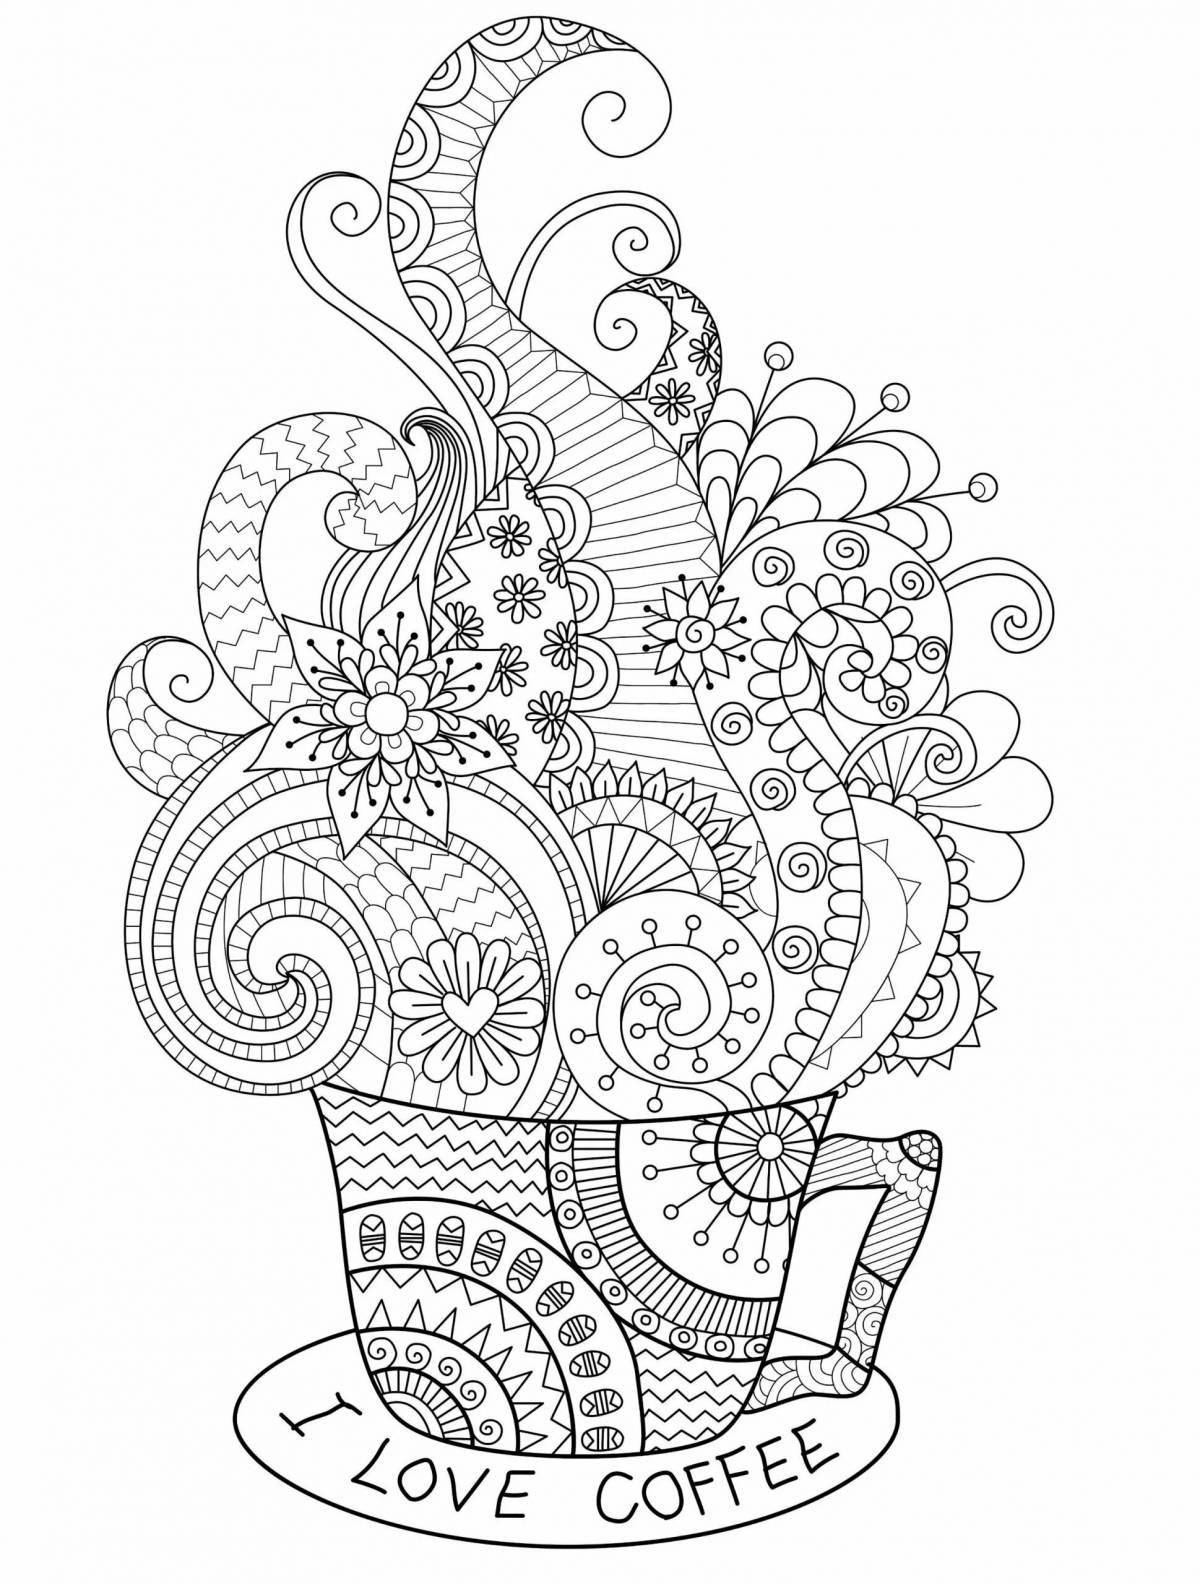 Colourful coloring for children's art supplies